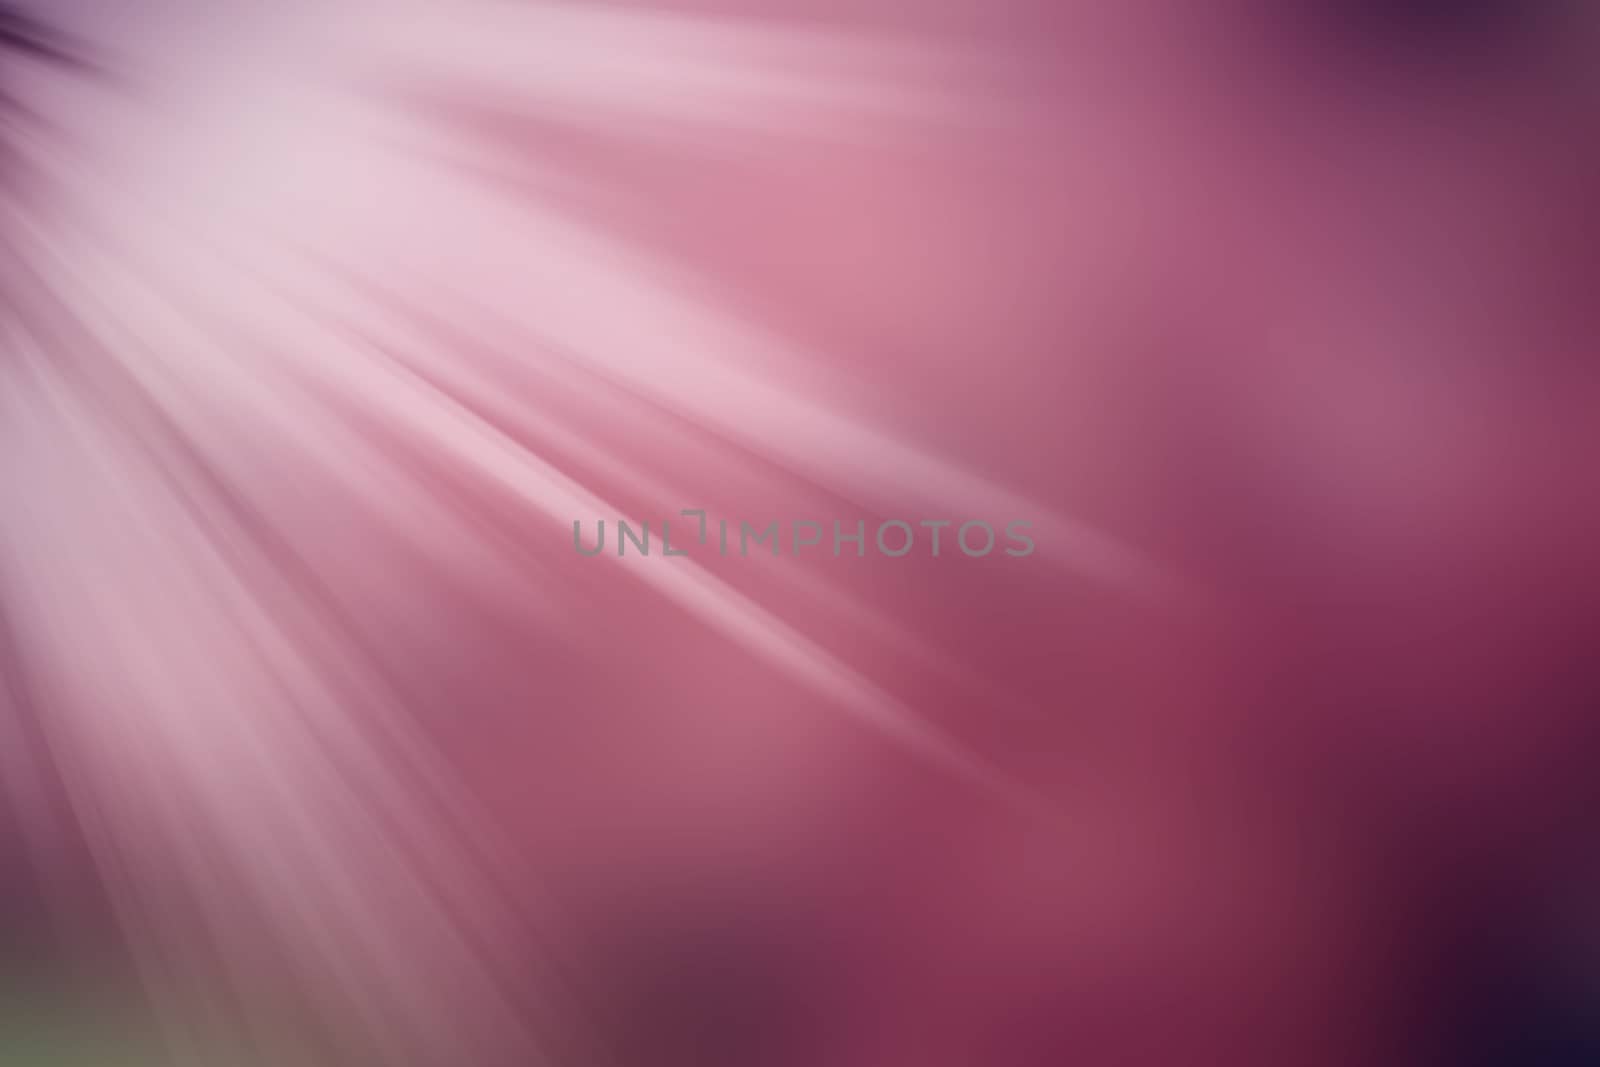 abstract natural blur background,  Asymmetric light rays, nature background